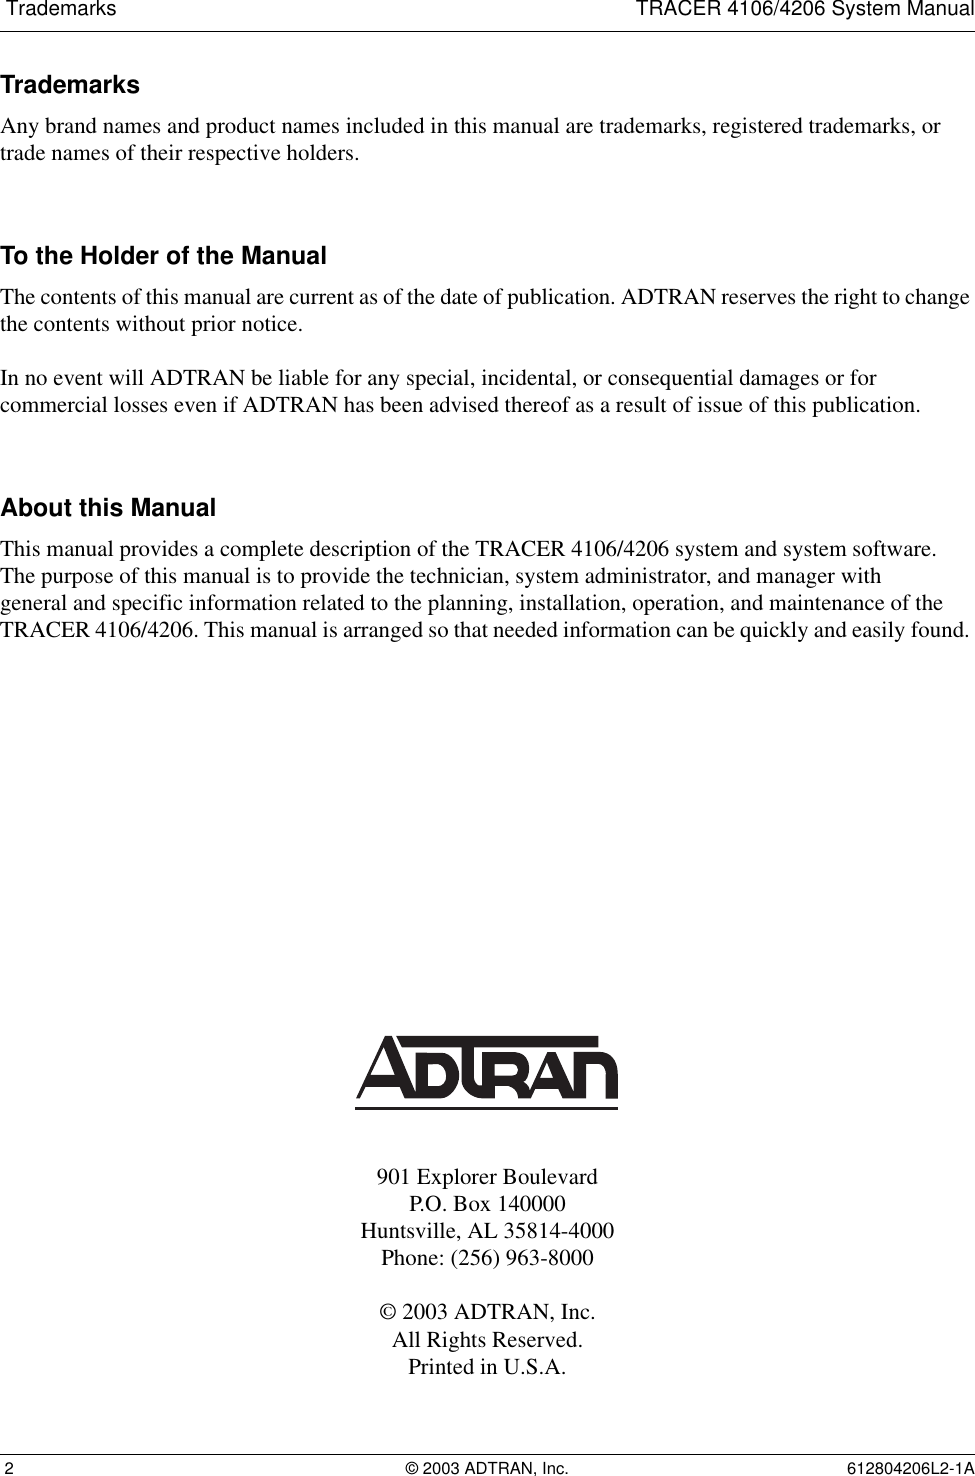  Trademarks TRACER 4106/4206 System Manual 2 © 2003 ADTRAN, Inc. 612804206L2-1ATrademarksAny brand names and product names included in this manual are trademarks, registered trademarks, or trade names of their respective holders.To the Holder of the ManualThe contents of this manual are current as of the date of publication. ADTRAN reserves the right to change the contents without prior notice.In no event will ADTRAN be liable for any special, incidental, or consequential damages or for commercial losses even if ADTRAN has been advised thereof as a result of issue of this publication.About this ManualThis manual provides a complete description of the TRACER 4106/4206 system and system software.The purpose of this manual is to provide the technician, system administrator, and manager withgeneral and specific information related to the planning, installation, operation, and maintenance of the TRACER 4106/4206. This manual is arranged so that needed information can be quickly and easily found. 901 Explorer BoulevardP.O. Box 140000Huntsville, AL 35814-4000Phone: (256) 963-8000© 2003 ADTRAN, Inc.All Rights Reserved.Printed in U.S.A.